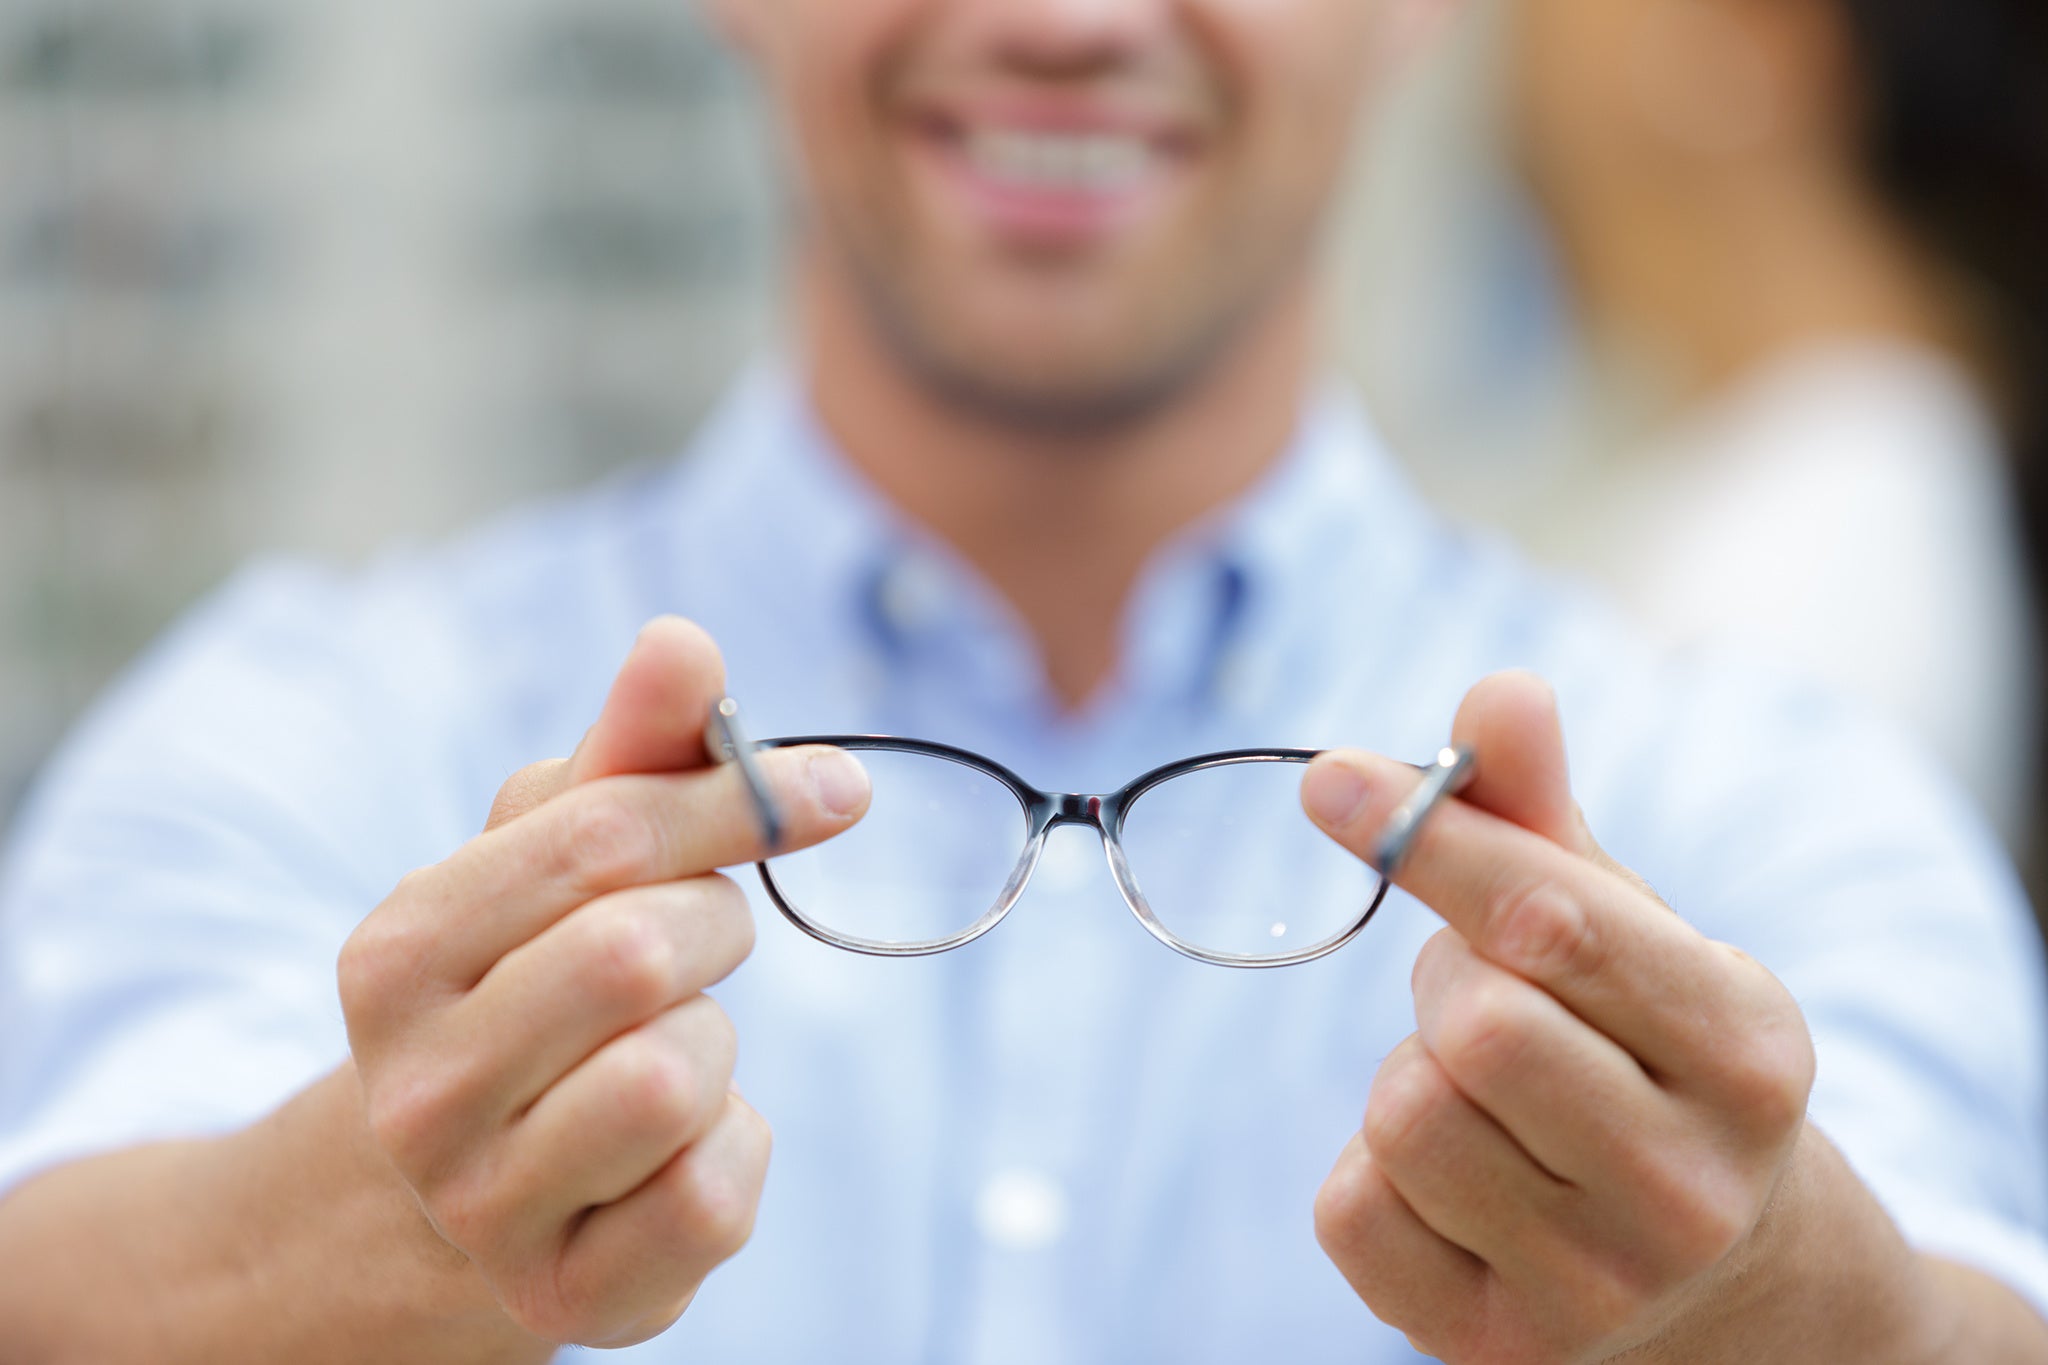 close up view of spectacles held by male optician